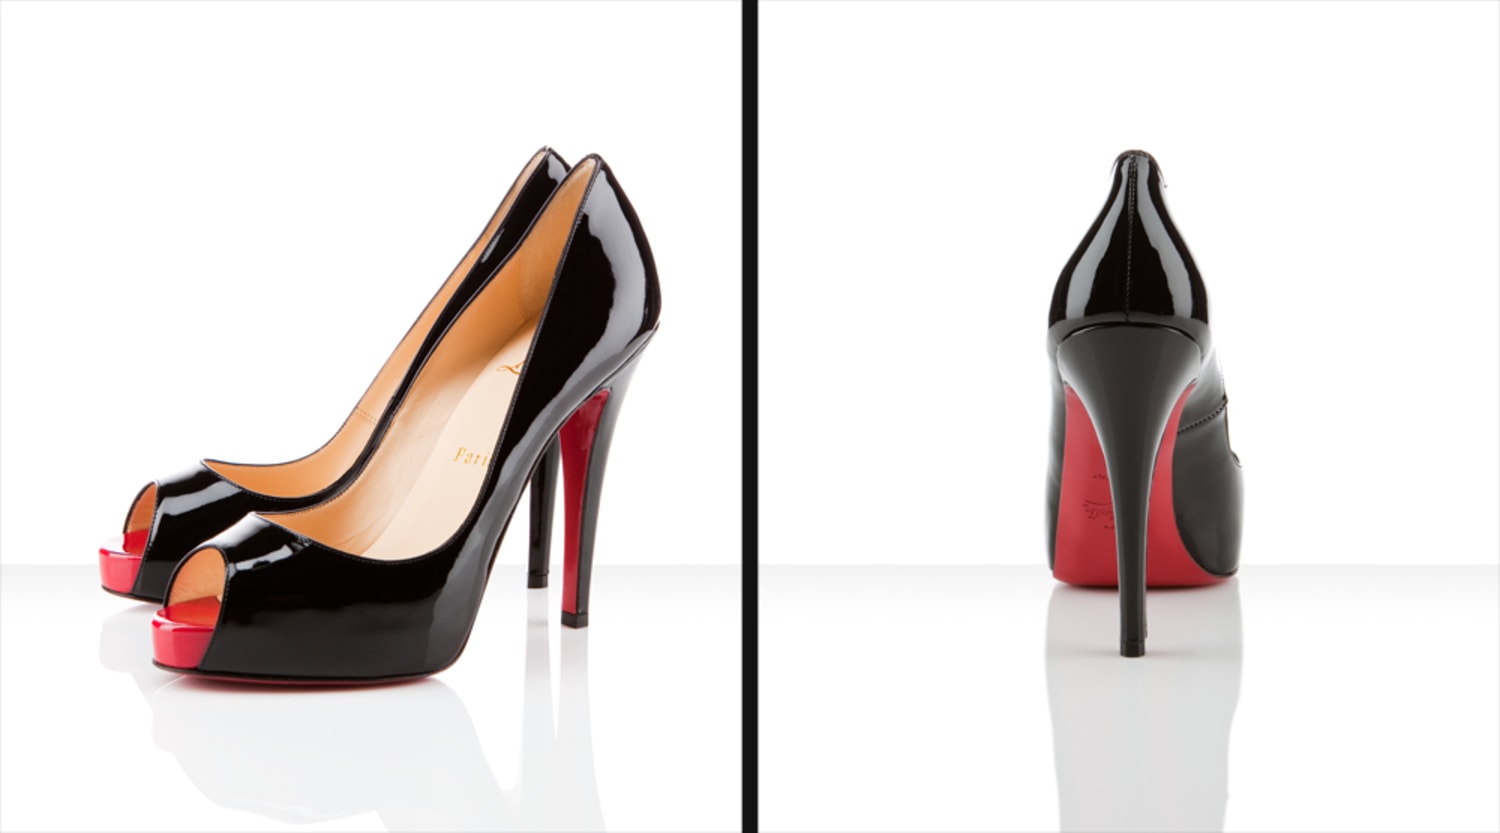 Paint the back of your heels red to mimic a pair of Christian